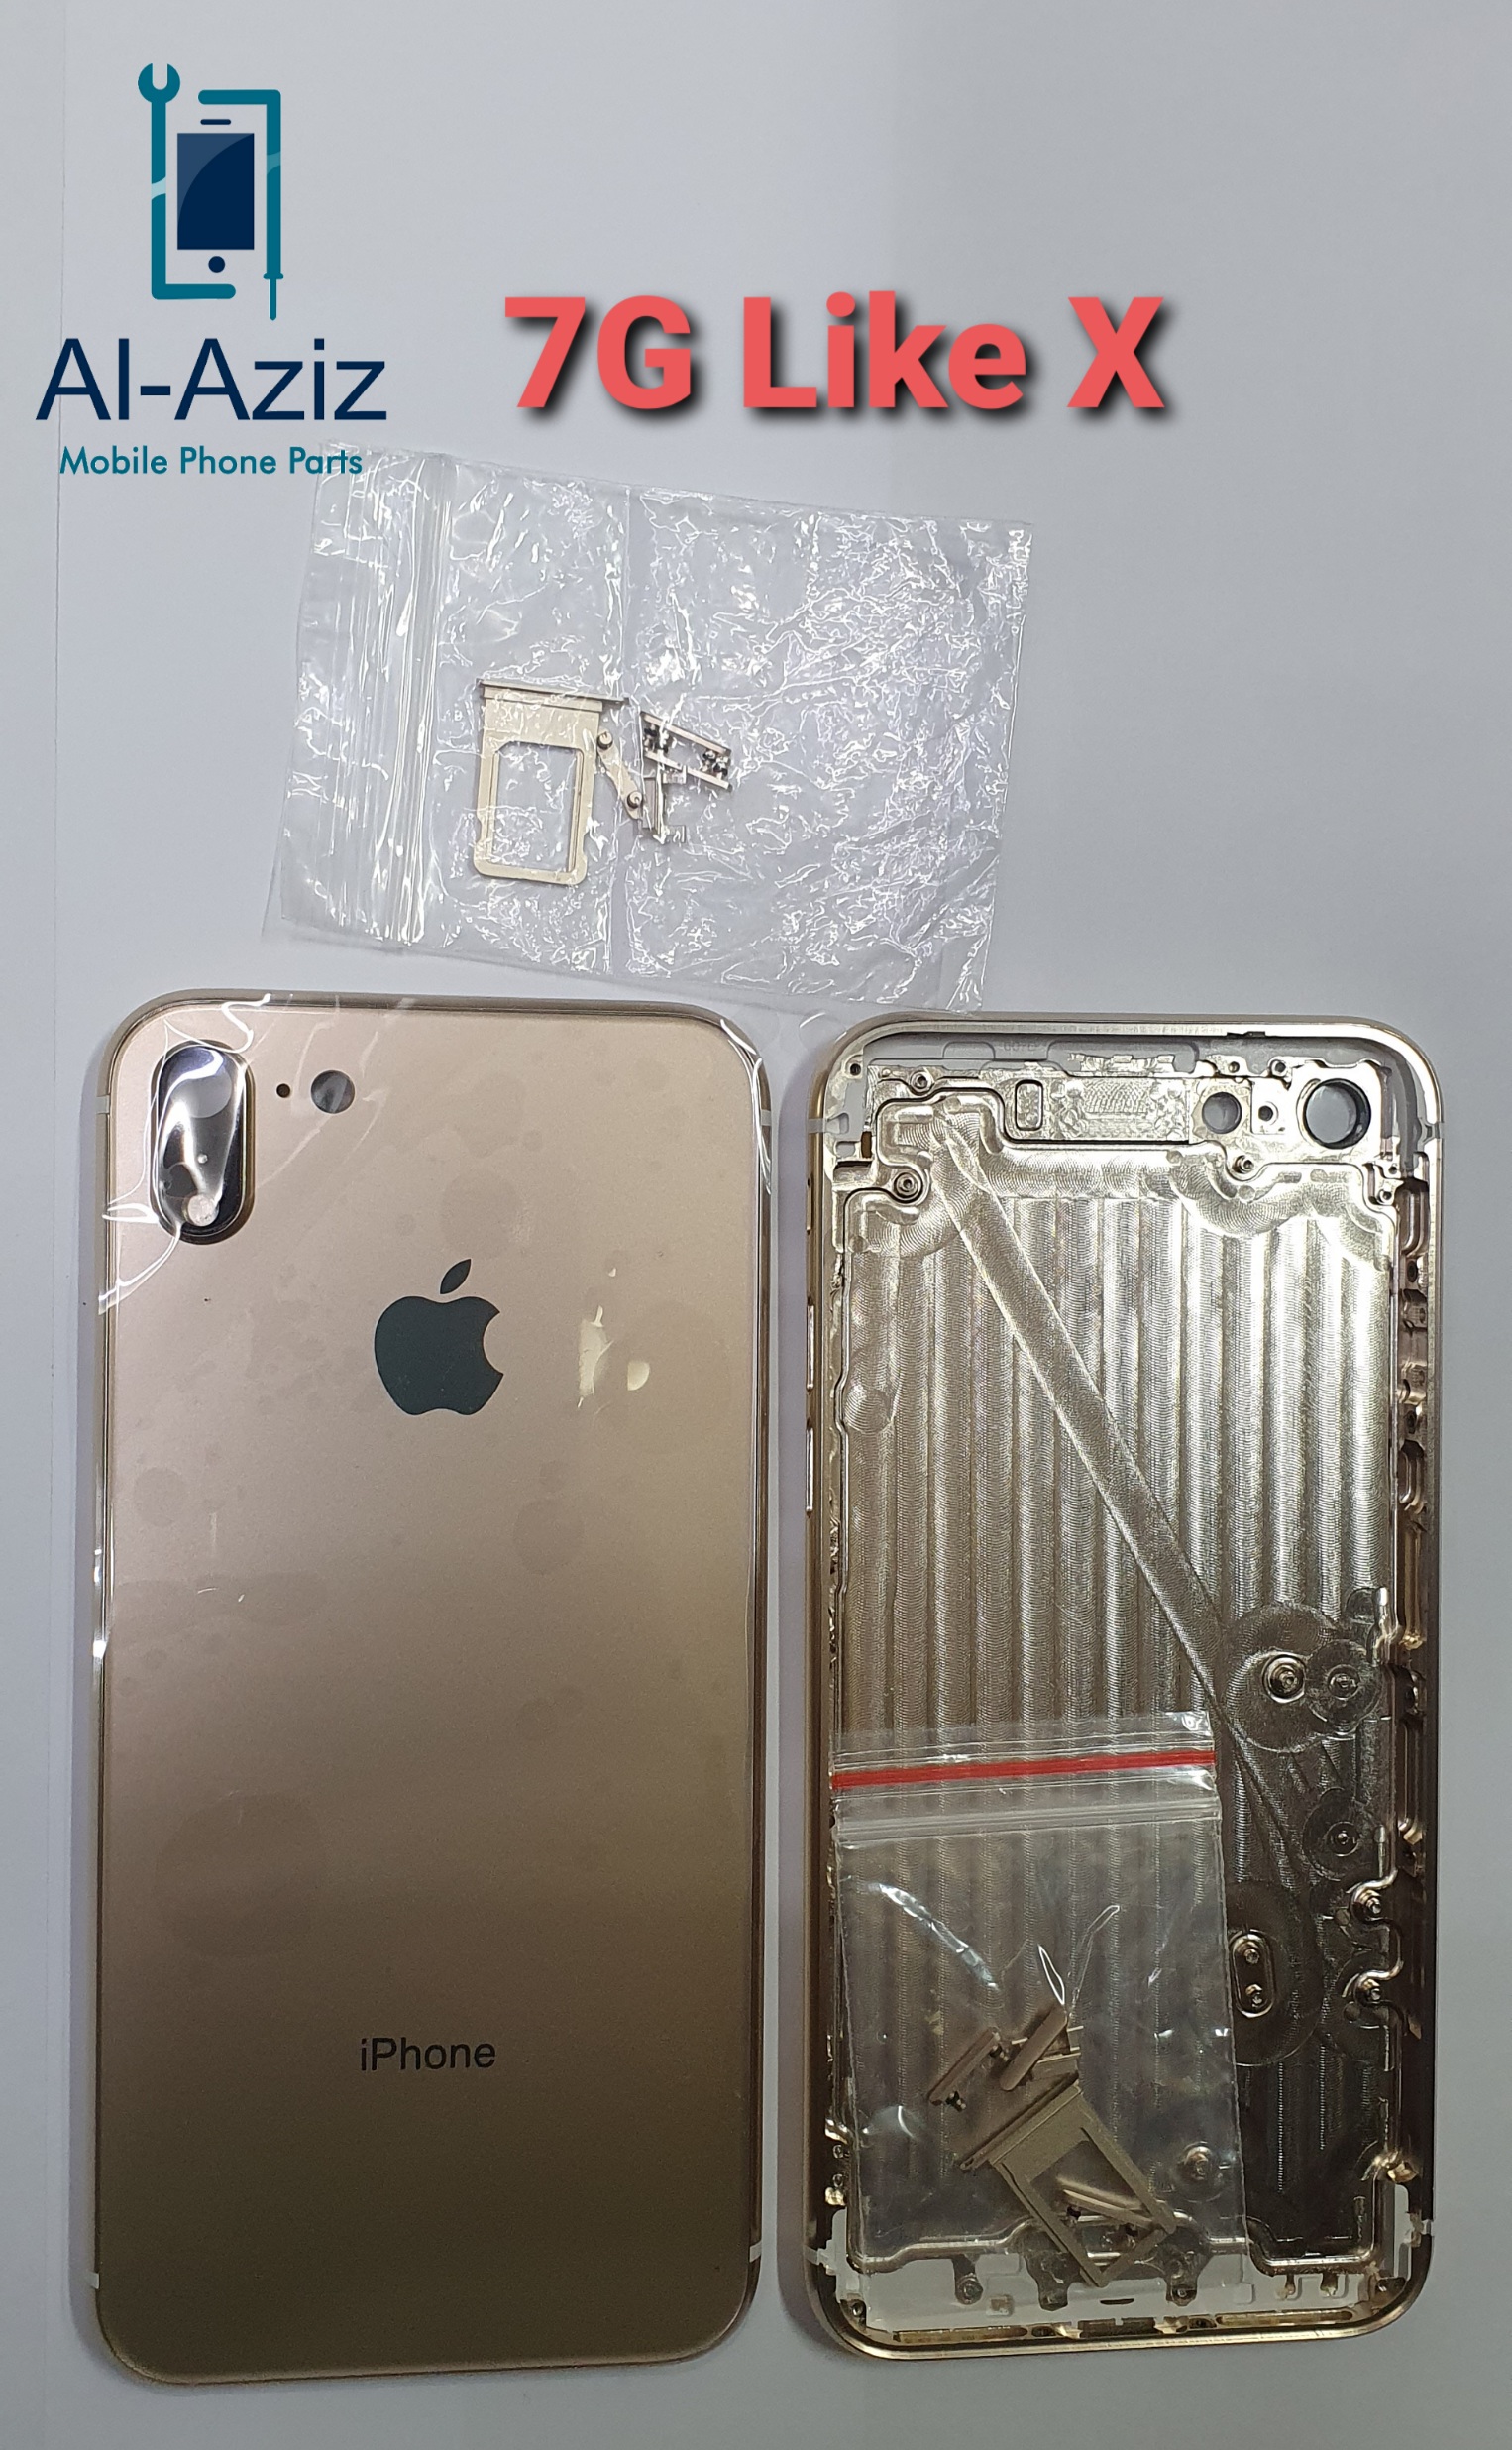 Apple Iphone 7 Convert To Iphone X With Complete Housing Casing Body Back Glass Middle Frame Replacement Buy Online At Best Prices In Pakistan Daraz Pk